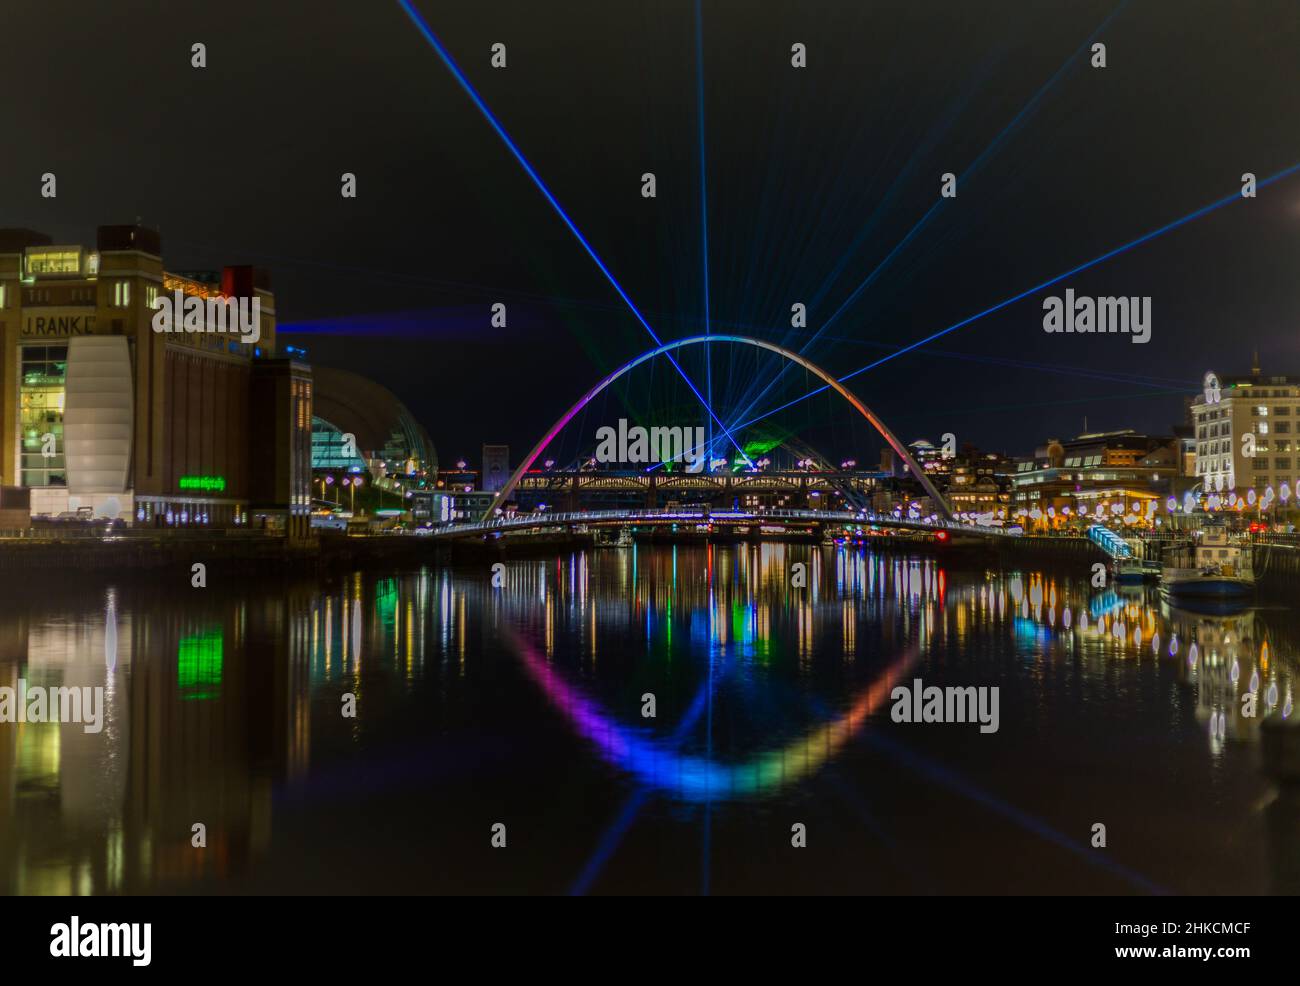 To bring in New Year's Eve in Newcastle, there was a laser show in the city, with the laser beams visible in the River Tyne Stock Photo